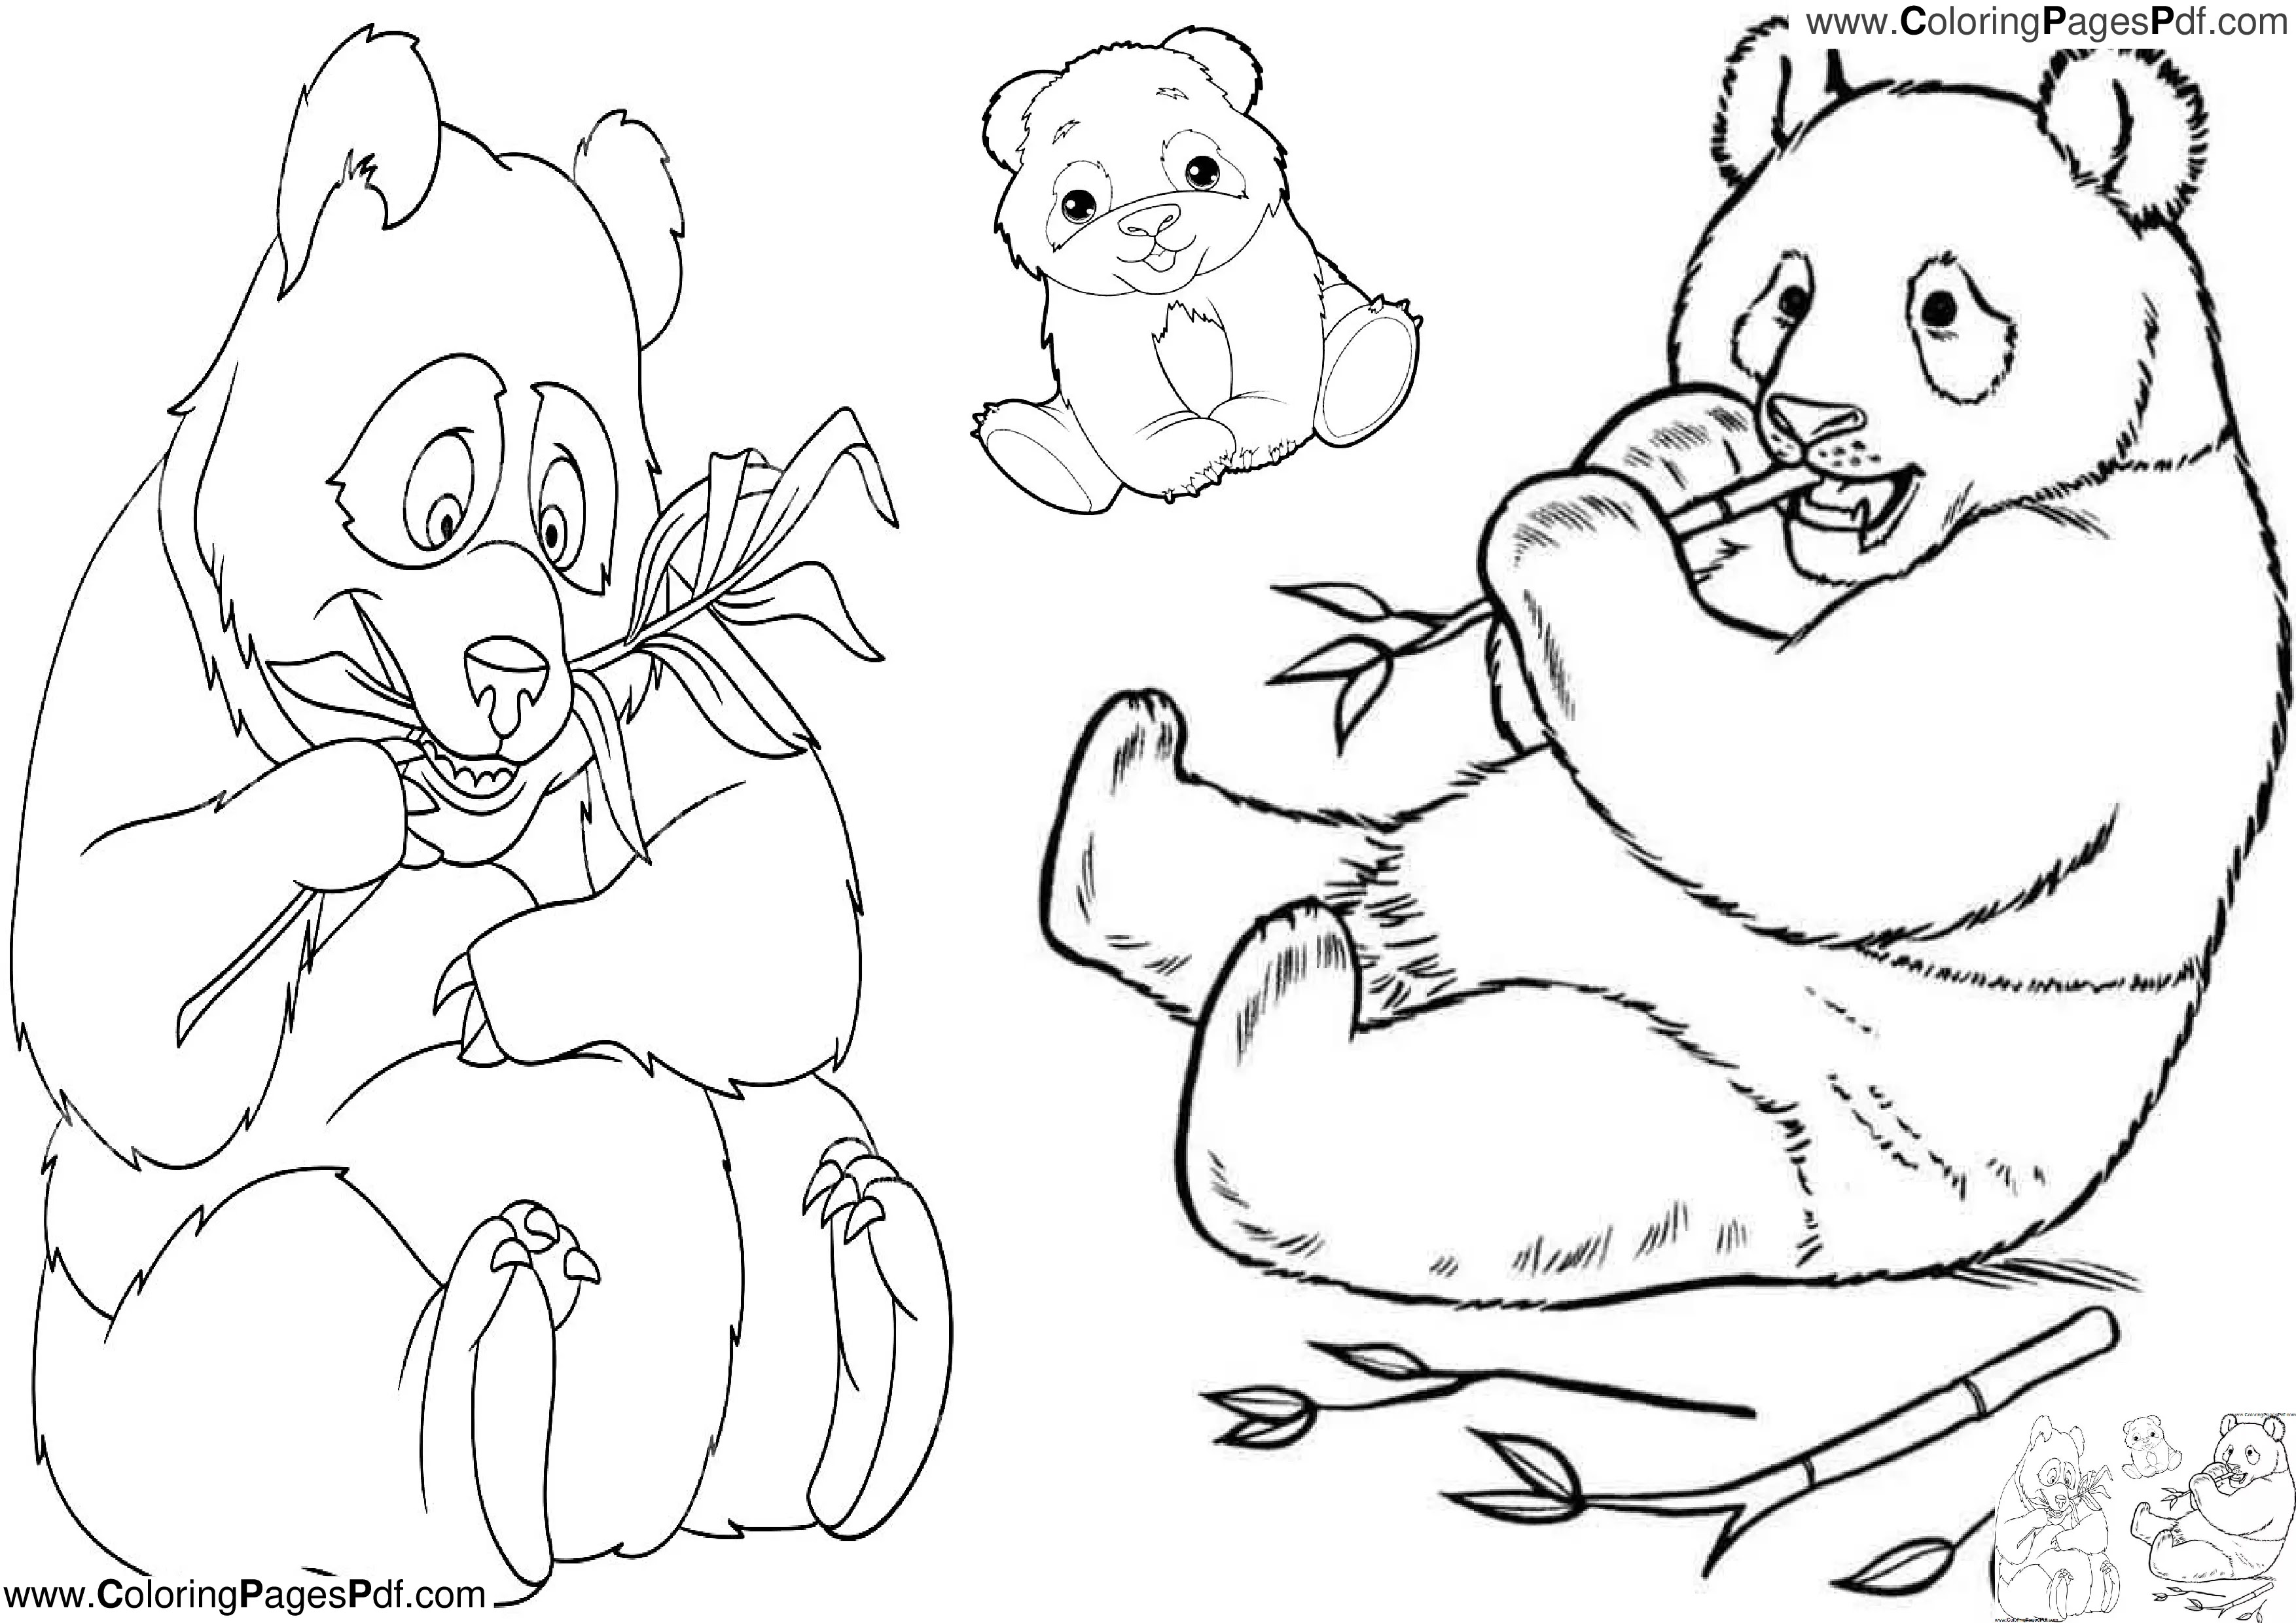 Panda coloring pages cute